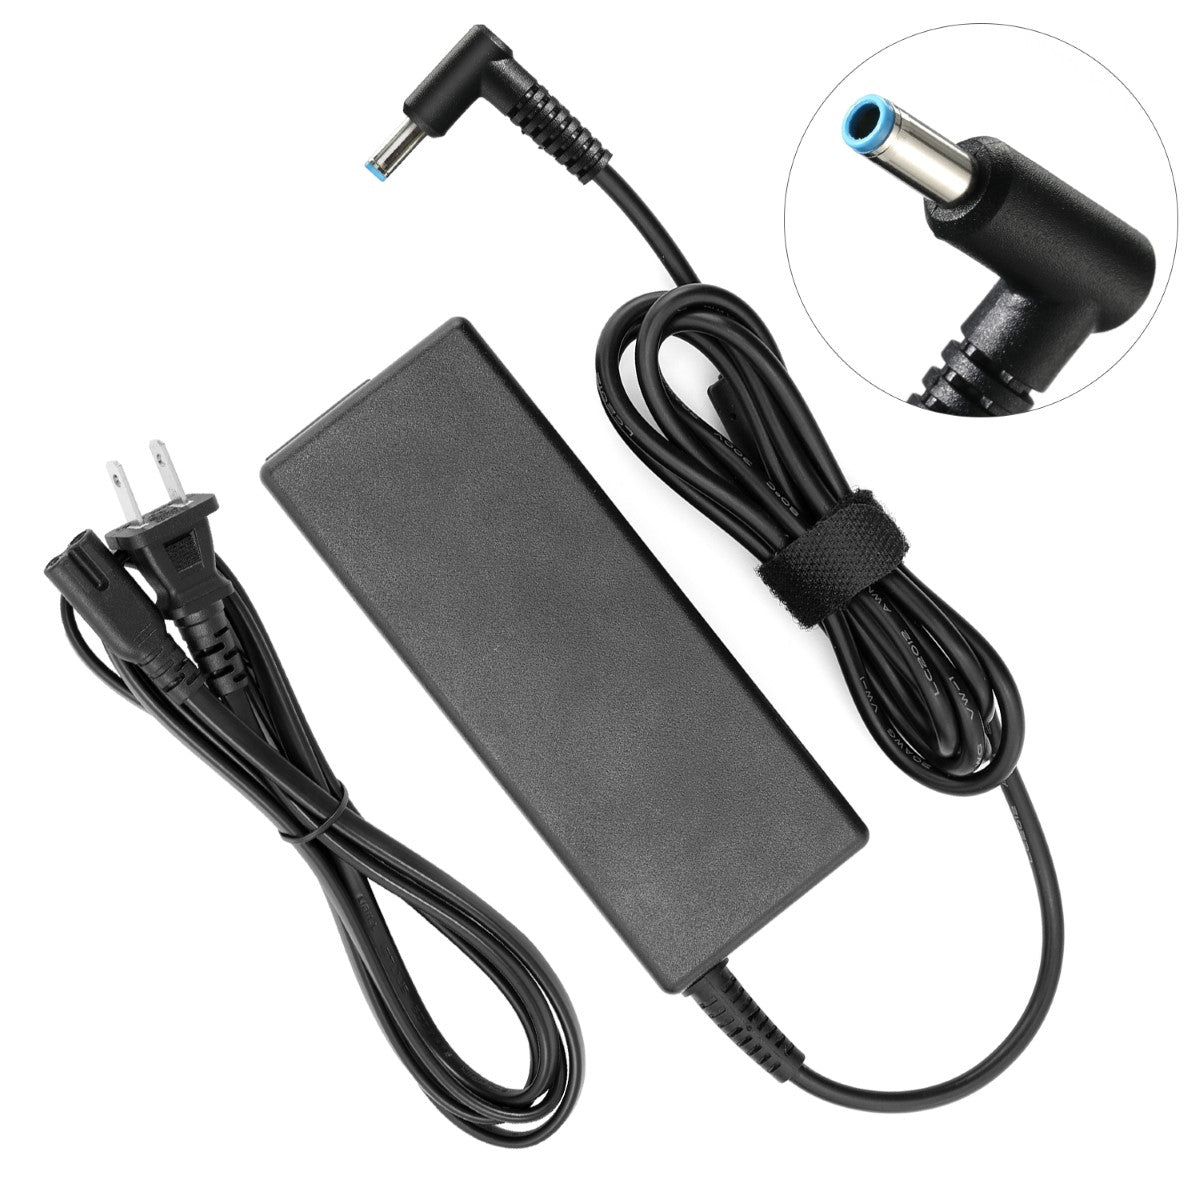 Charger for HP Stream 11-p000 Series x360 Convertible Laptop